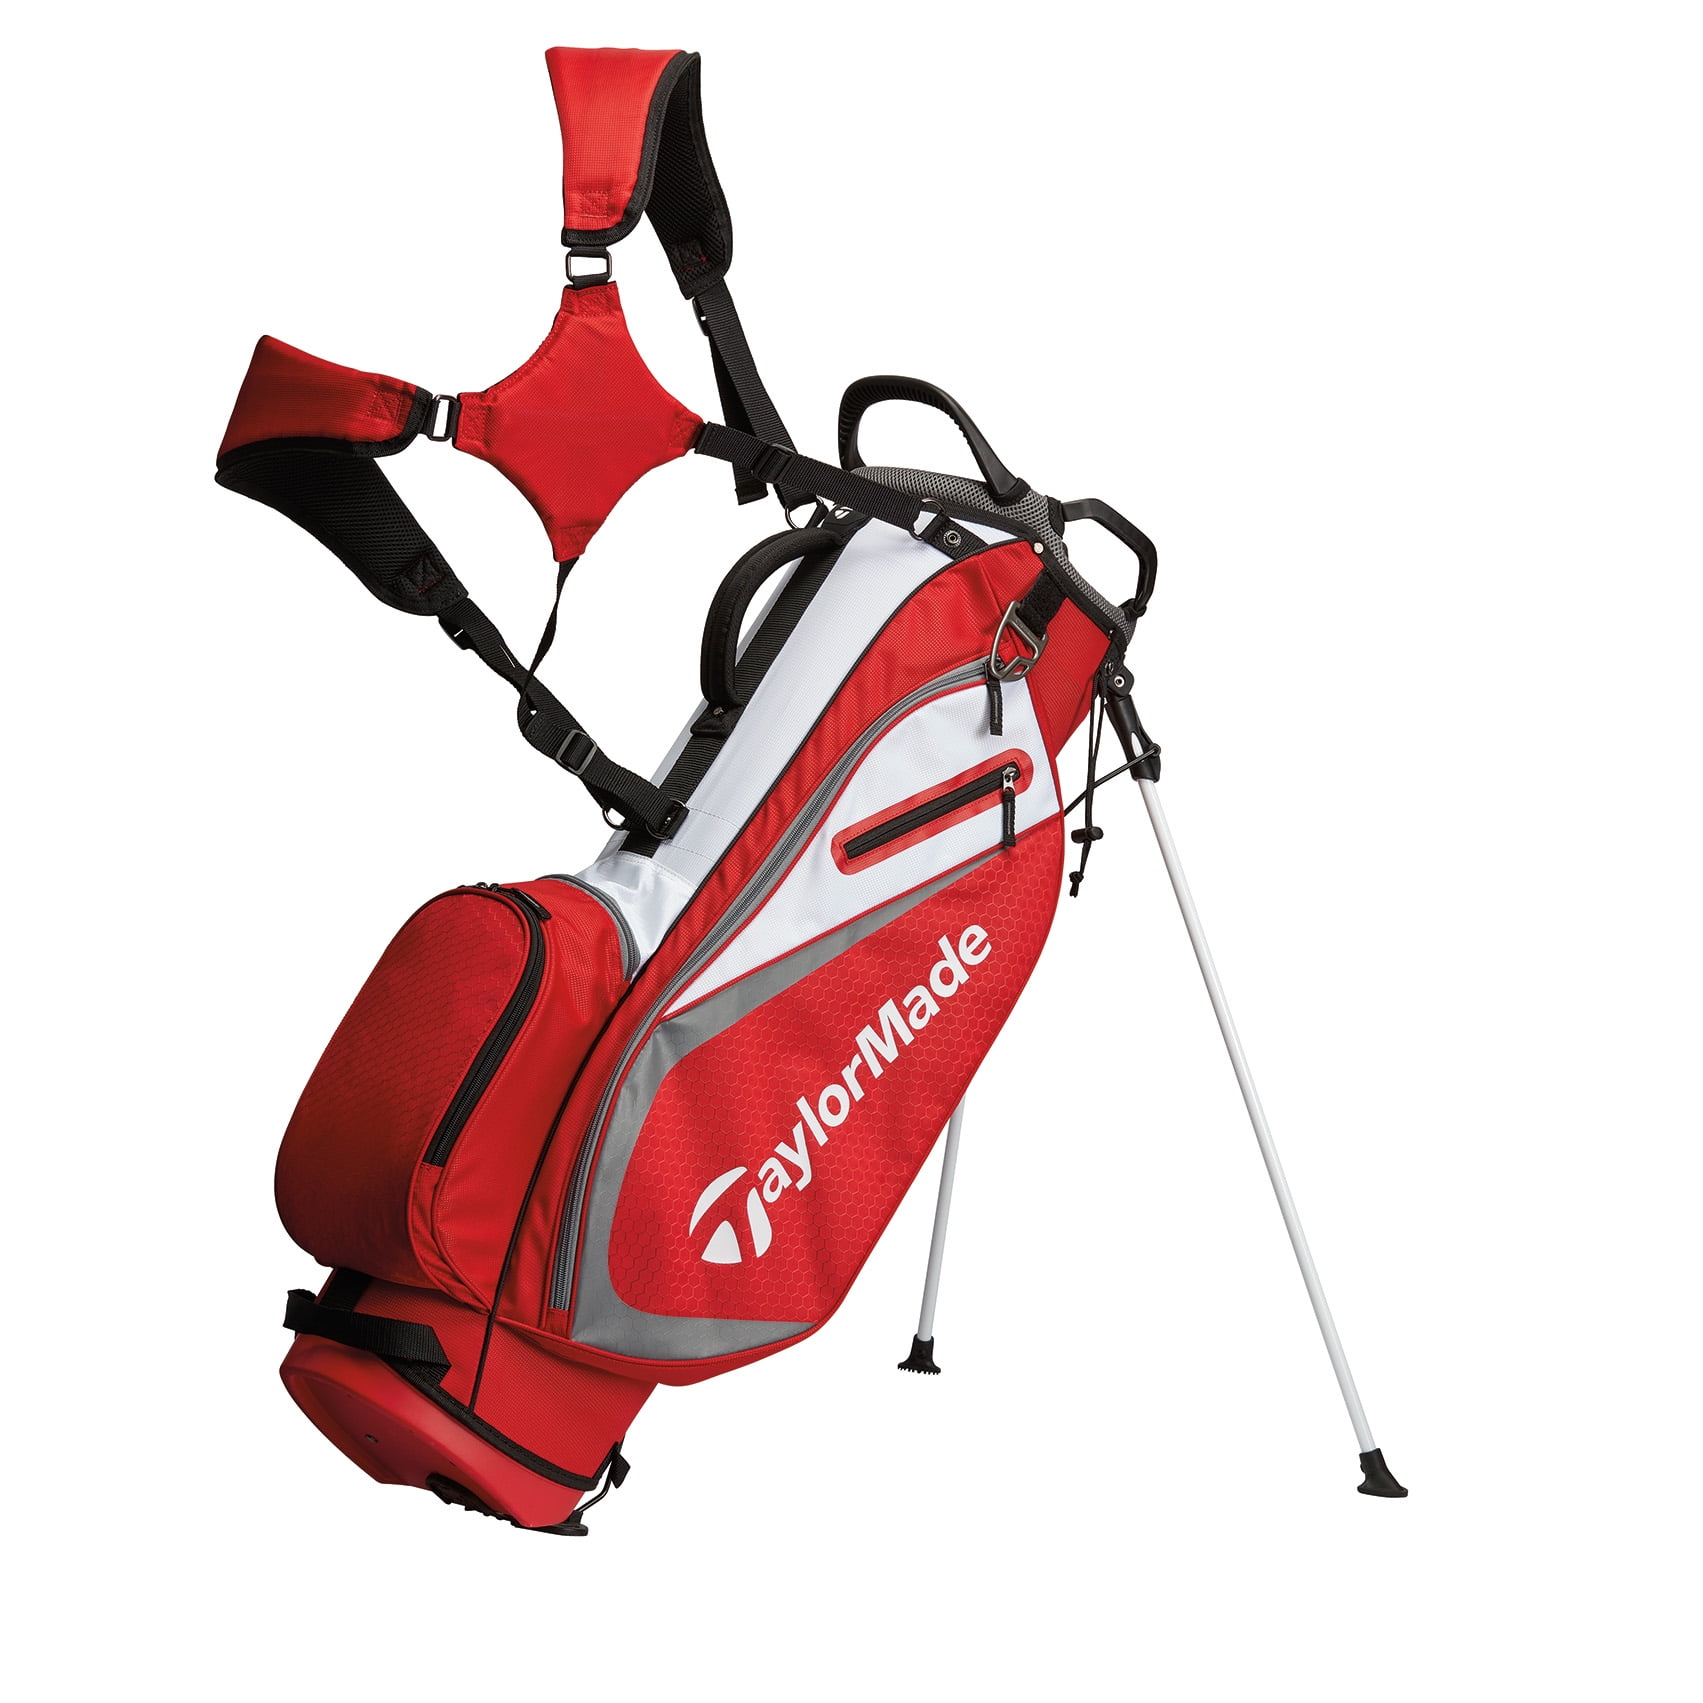 TaylorMade golf bags 2019 lineup includes 5 models new selfadjusting  strap system  GolfWRX